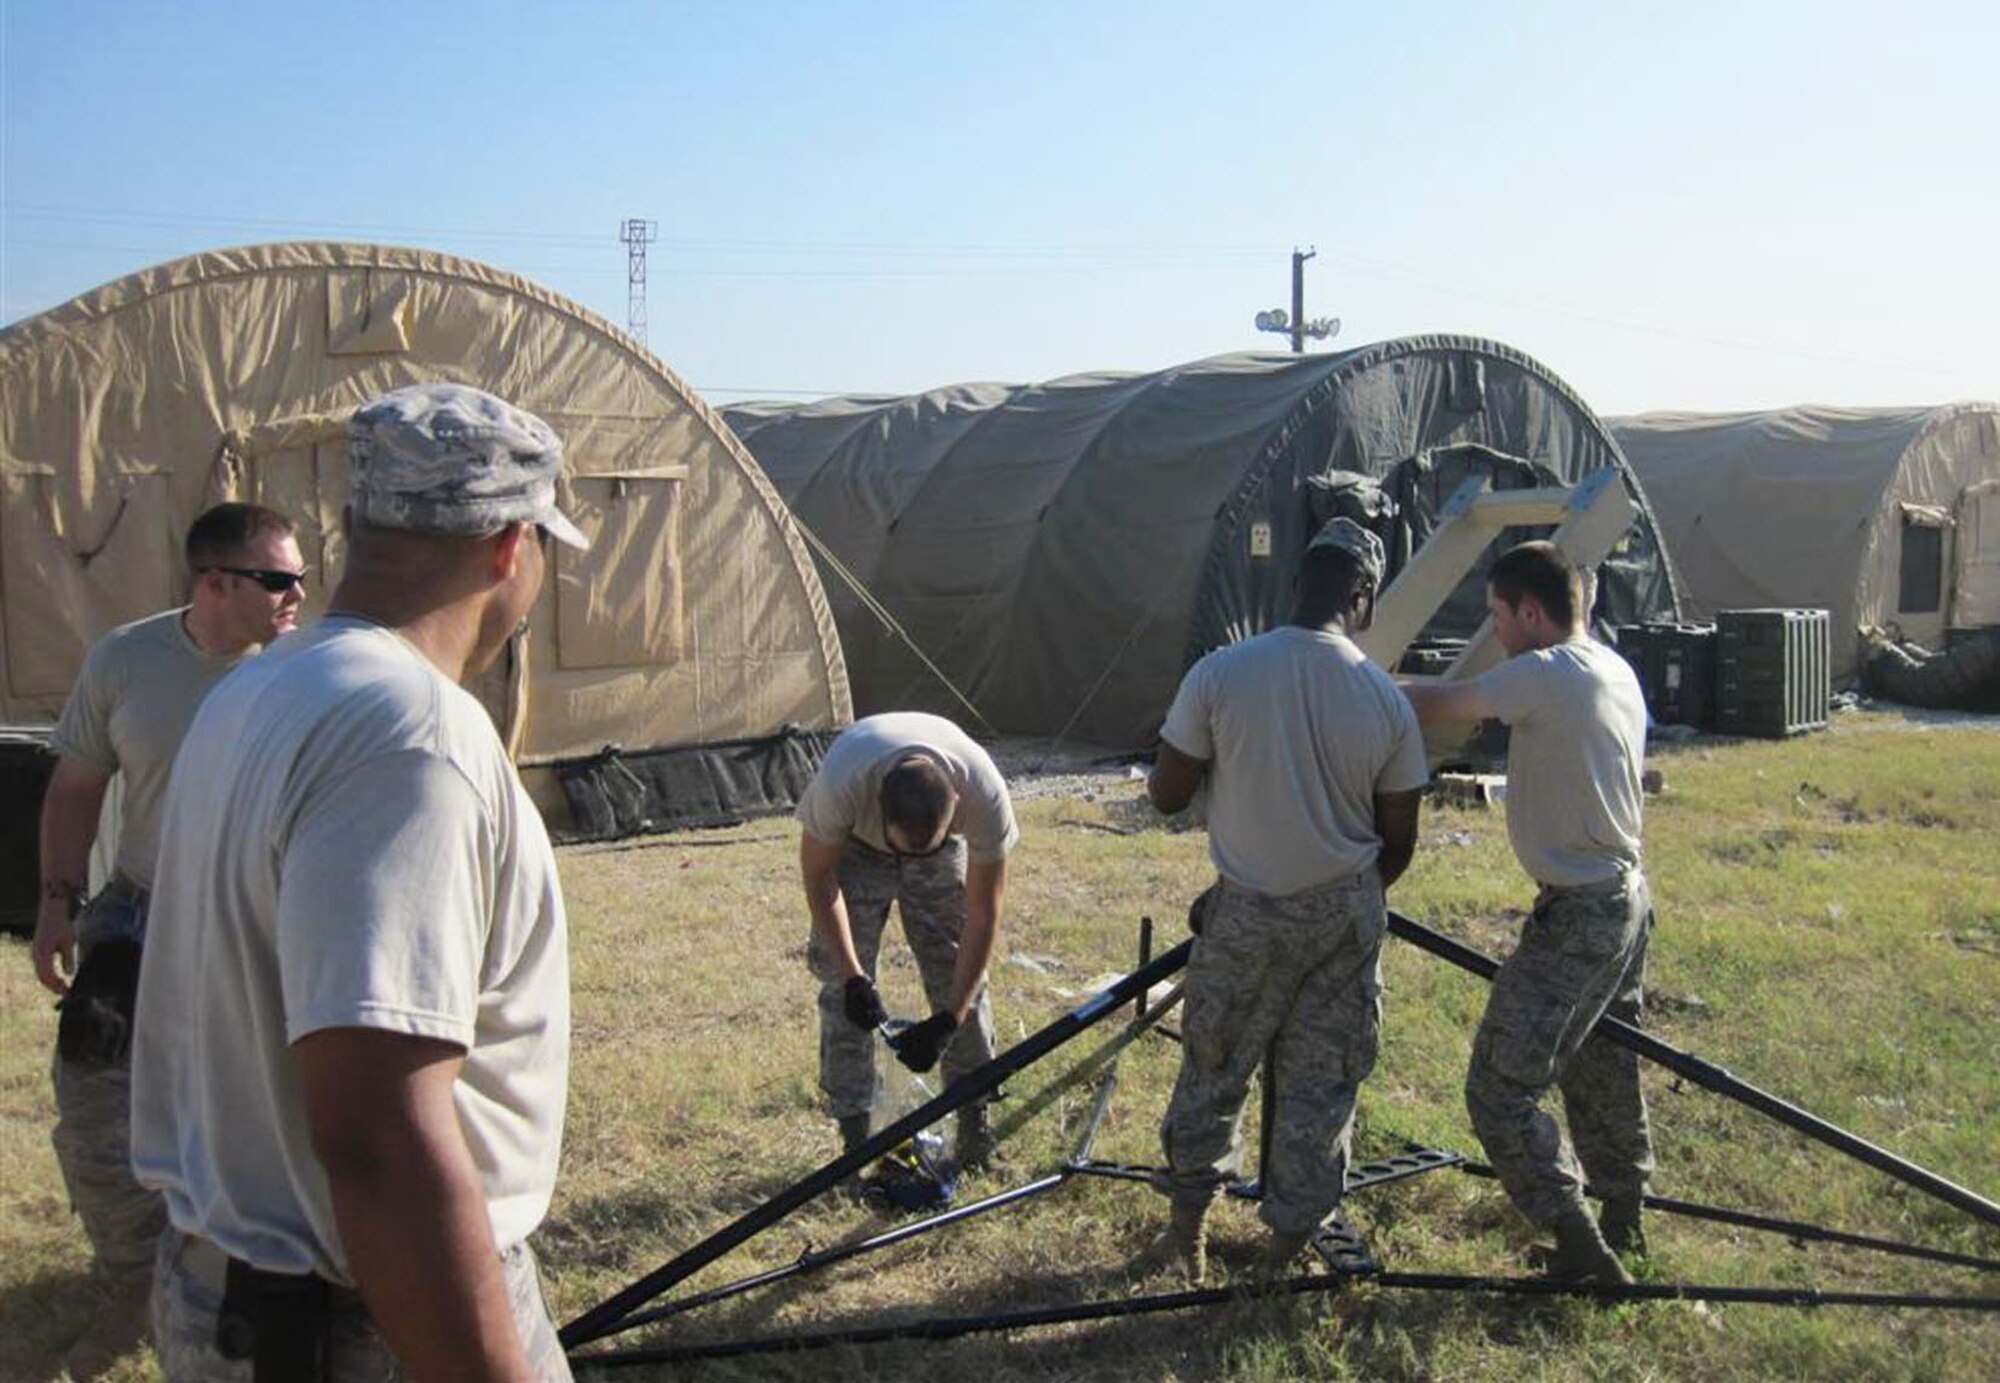 5th Combat Communications Group members (from left) Tech. Sgt. Turvon Casey, Senior Airman Travis Meyer, Staff Sgt. Trenton Morgan, Staff Sgt. Jarrell Williams and Senior Airman Thomas Williams, set up the USC-60 Satellite dish used to provide voice and data communications for medical personnel of the 24th Expeditionary Medical Support unit. Courtesy photo